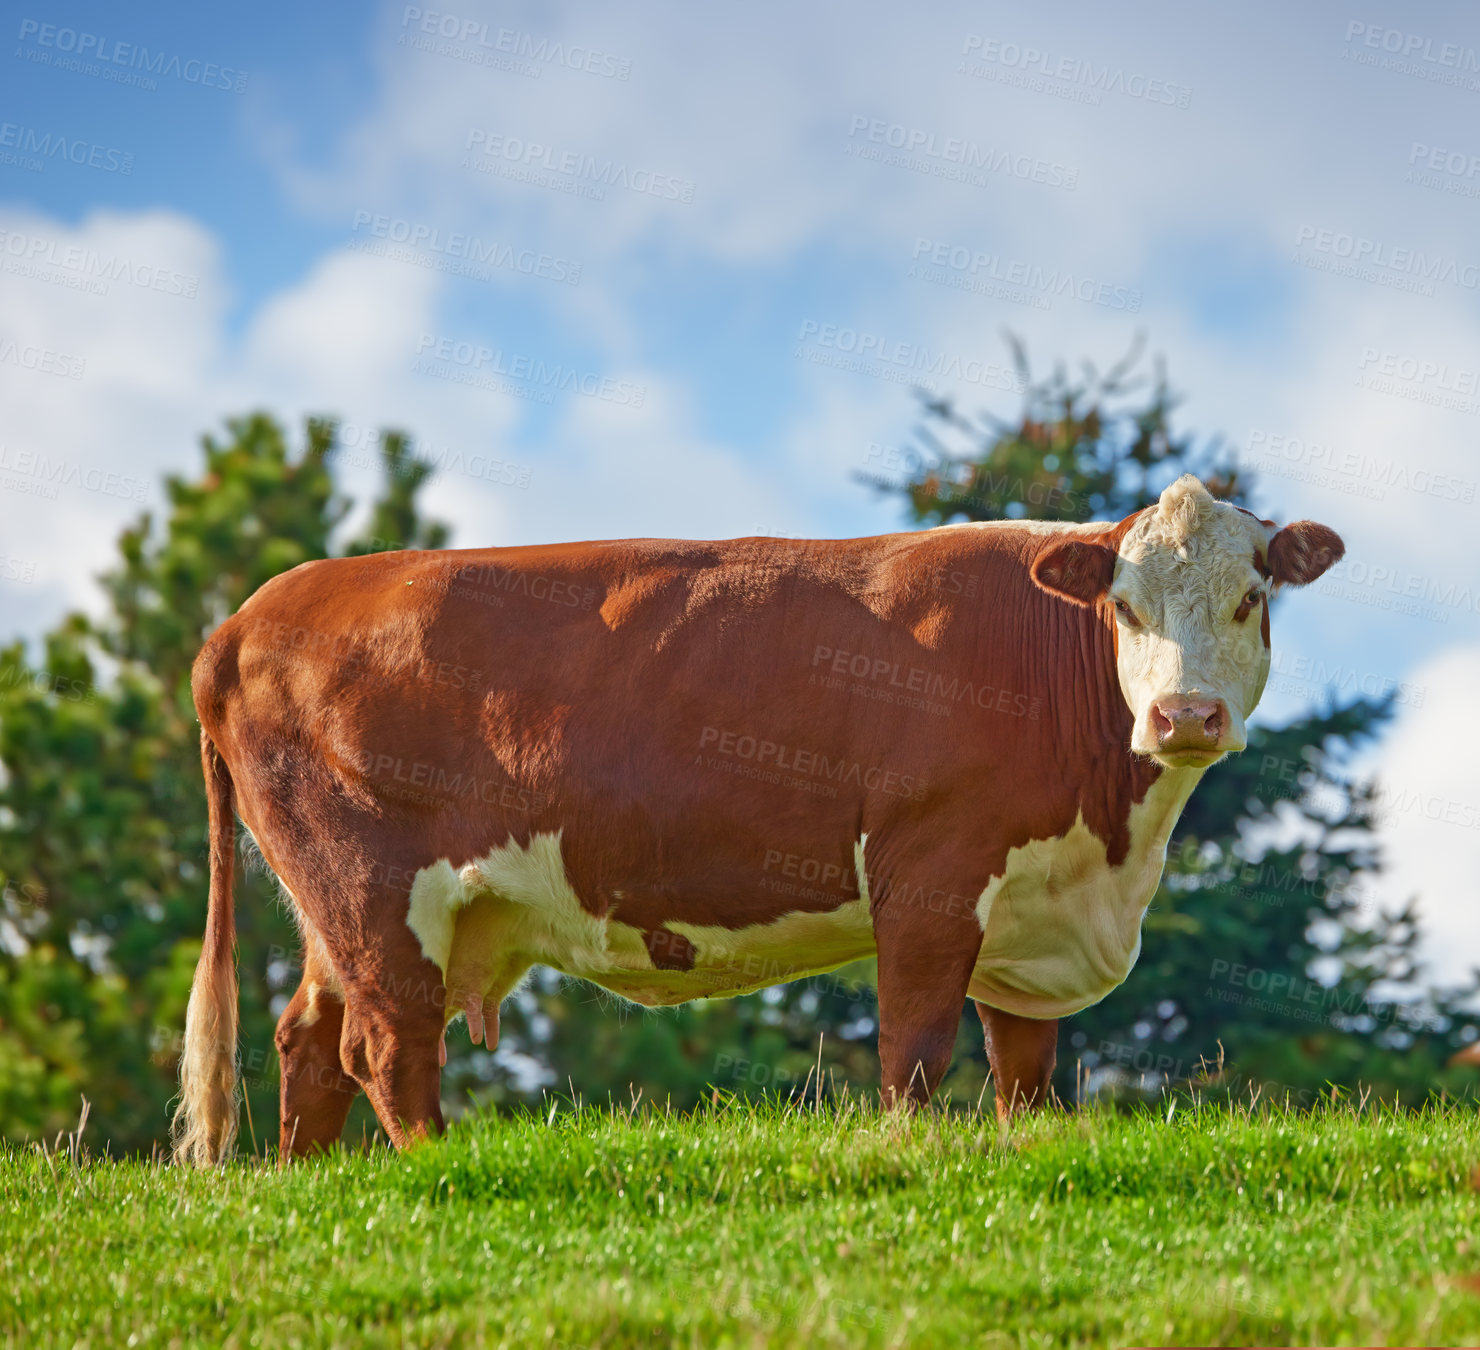 Buy stock photo A large brown cow grazing on a field or farm in the rural countryside with blue sky copy space. Bovine bull livestock on an organic and sustainable cattle farm for the beef and dairy industry